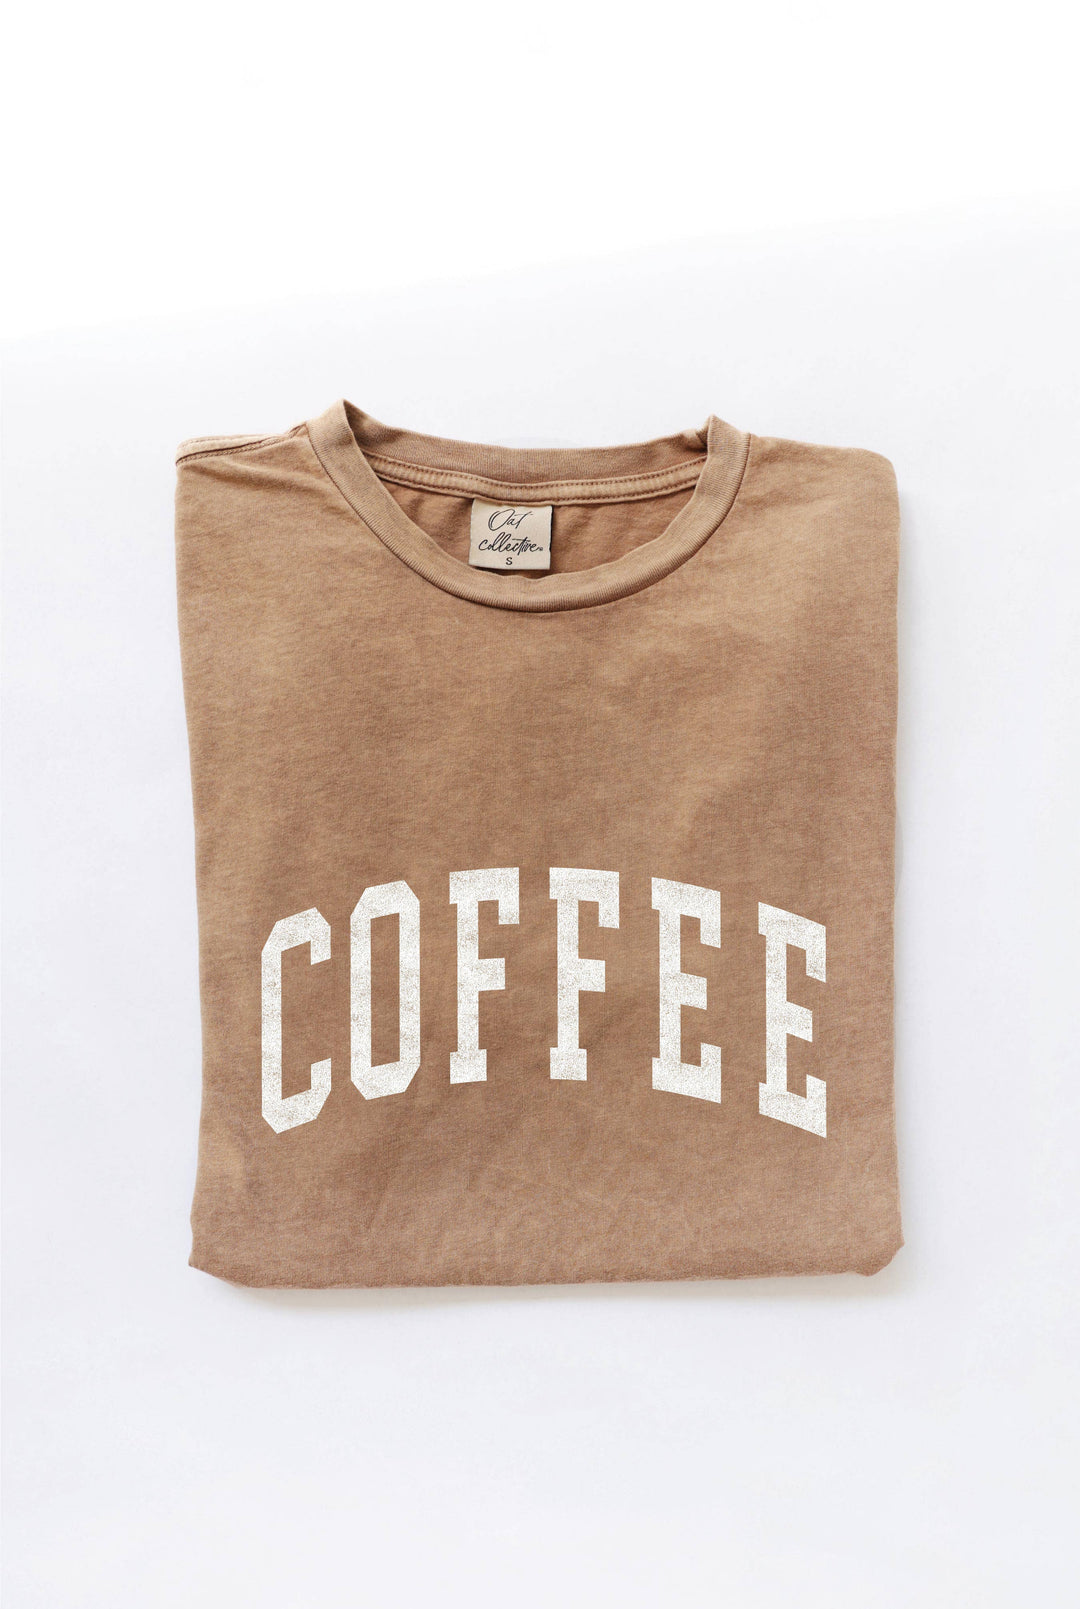 Toast- Coffee Washed Graphic Top T-shirt - Main Street Roasters